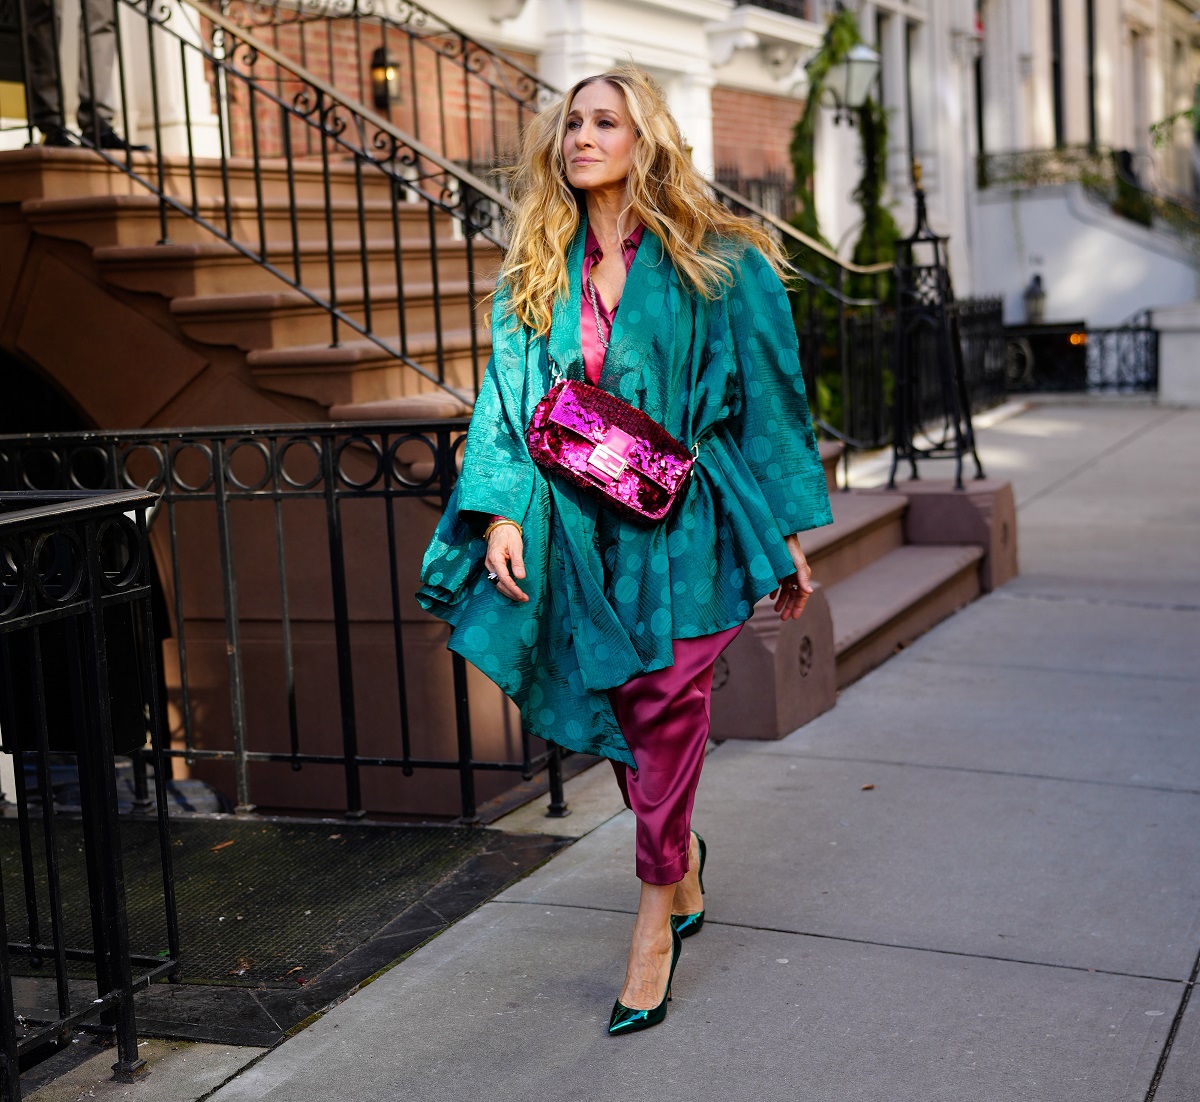 Sarah Jessica Parker as Carrie Bradshaw walks down a New York City street wearing magenta pants and an emerald green top during the filming of 'And Just Like That...' season 2